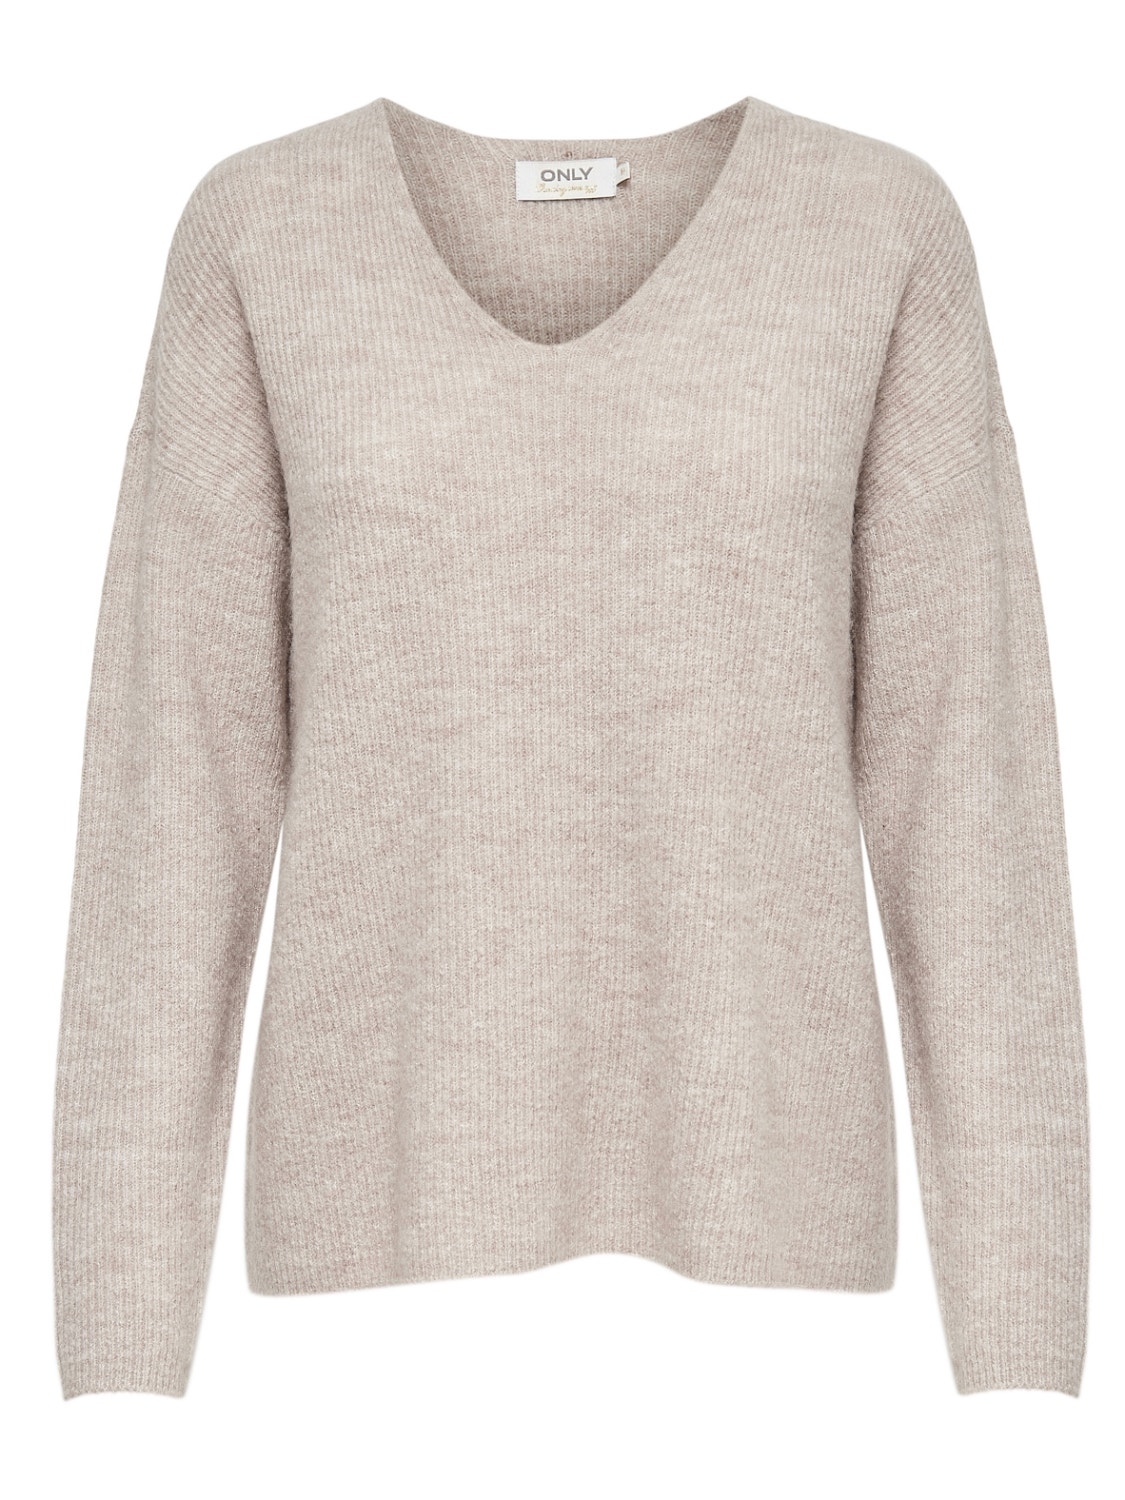 ONLY V-neck Knitted Pullover -Pumice Stone - 15204588